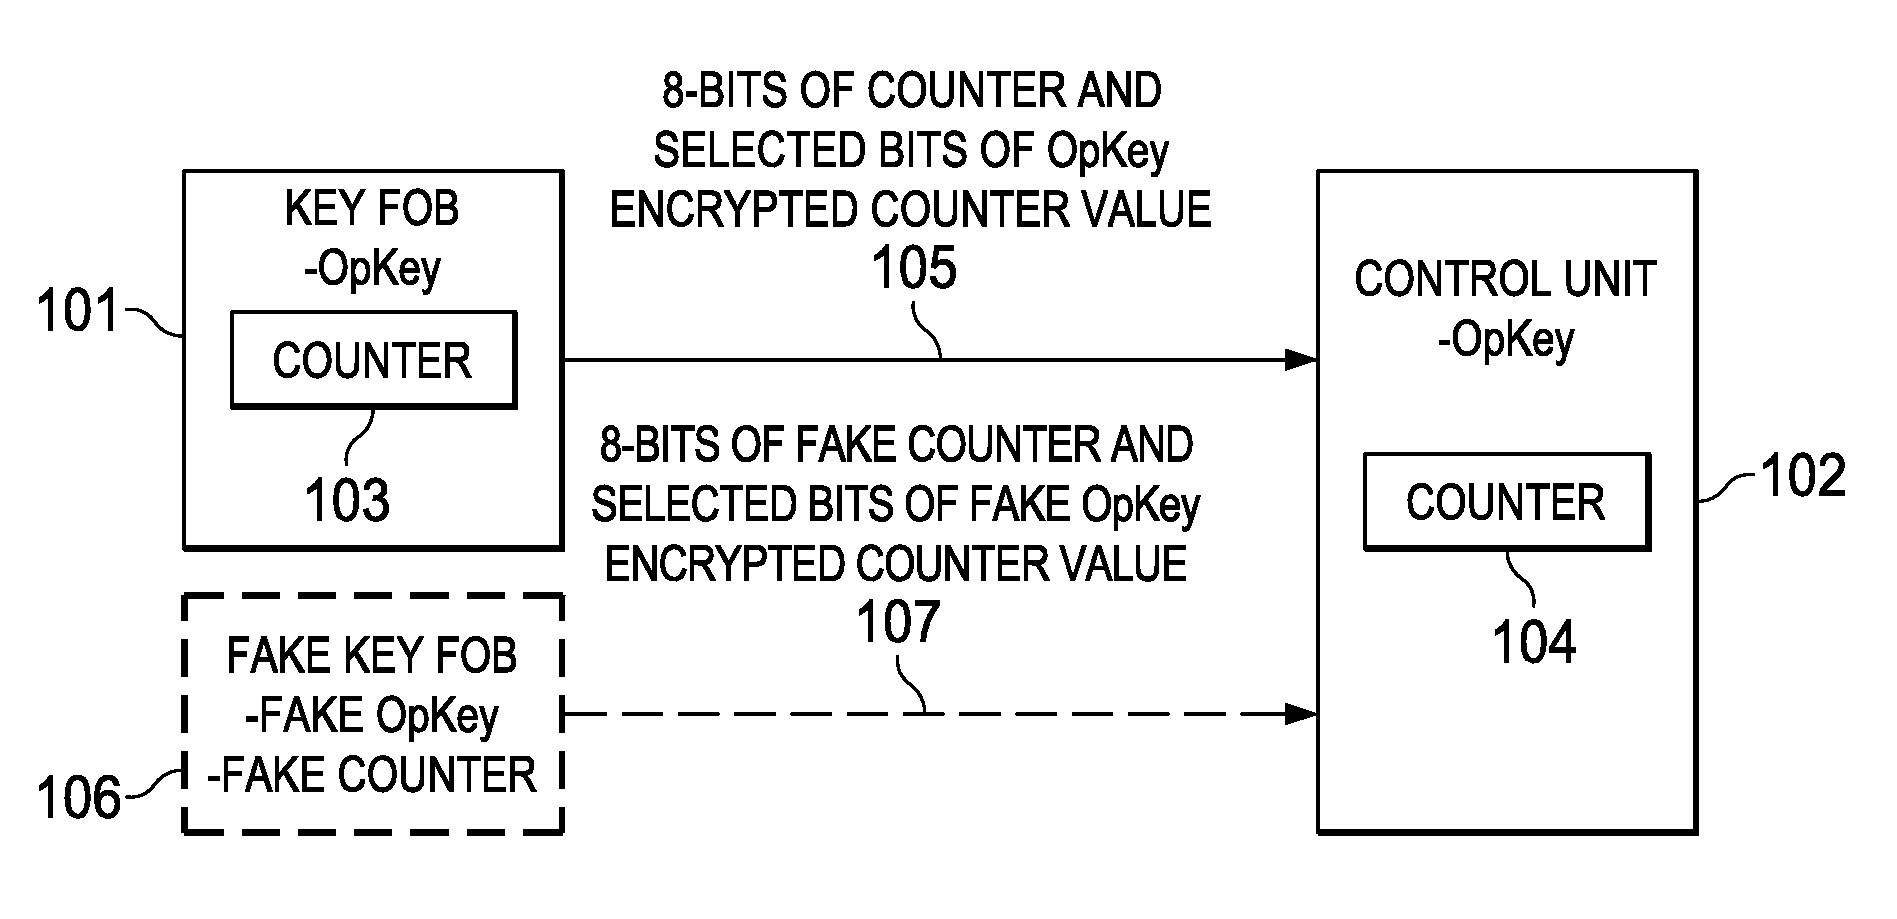 One-way key fob and vehicle pairing verification, retention, and revocation